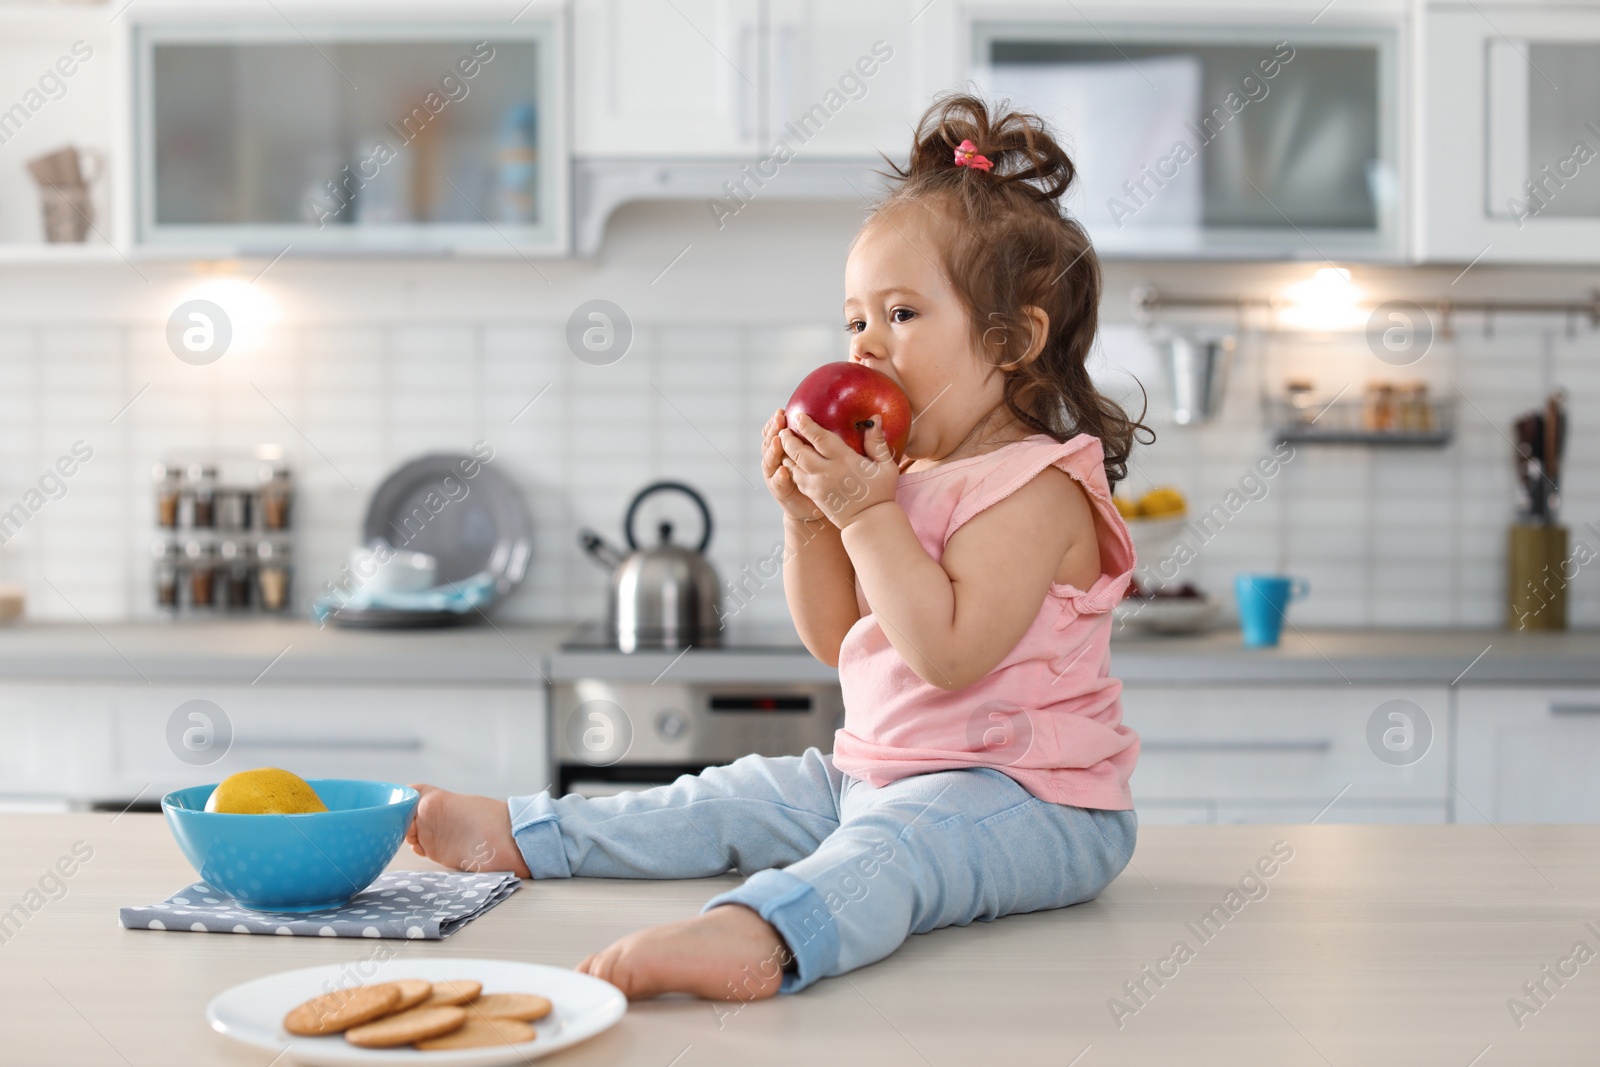 Photo of Adorable little baby girl eating apple on table in kitchen